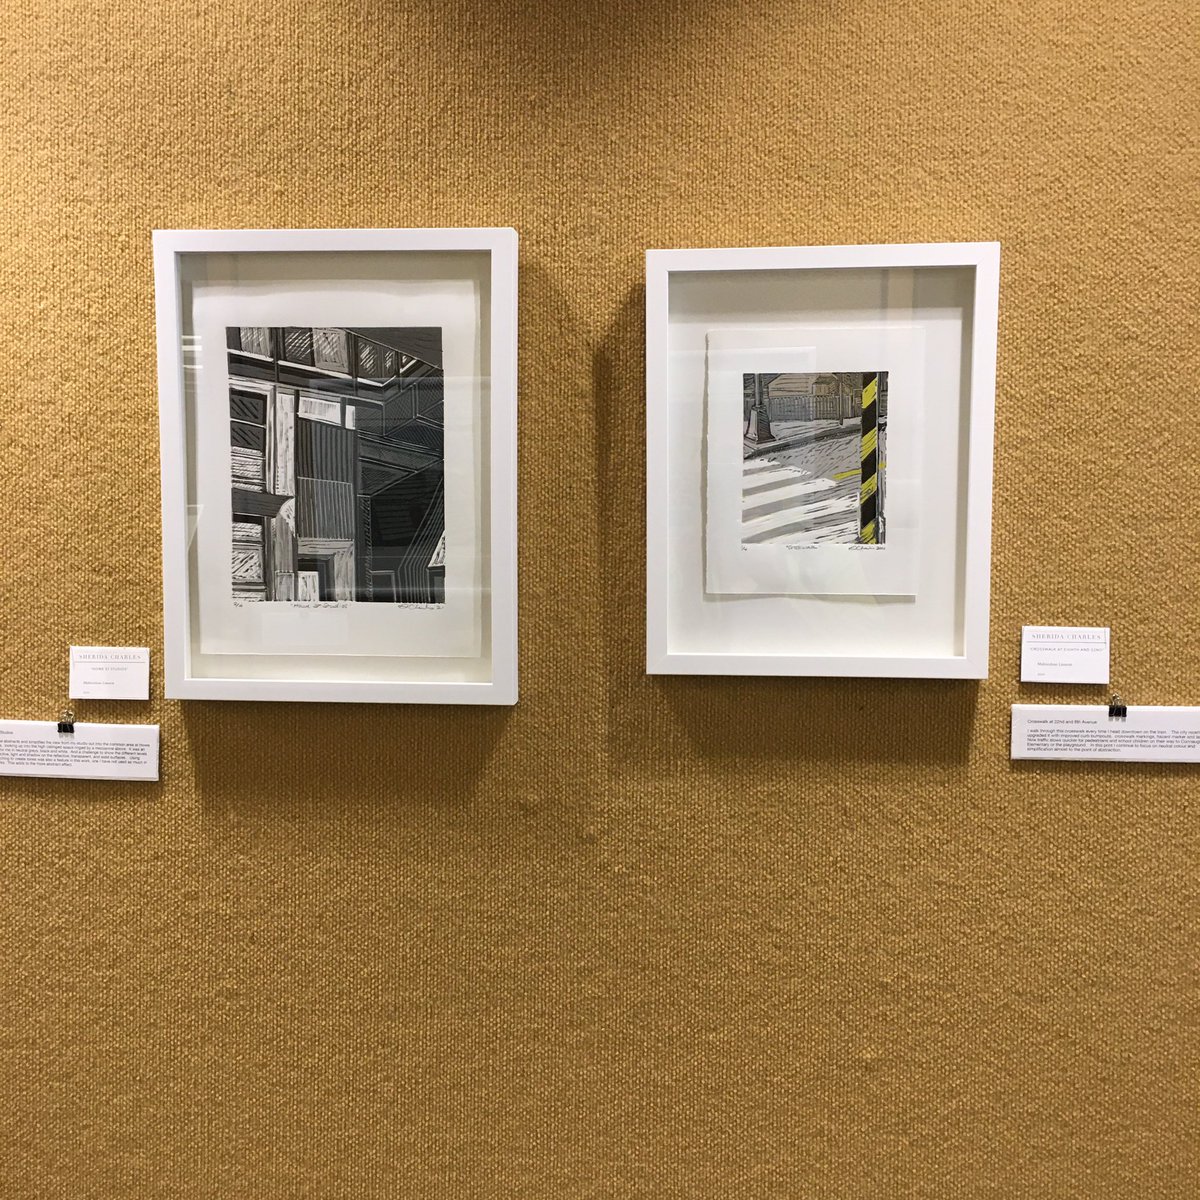 Only two weeks left to go see my “Locations in Linocut” exhibit at @NWPLibrary !   Hope you’ll take it in before June 30th. #localart #bcartist